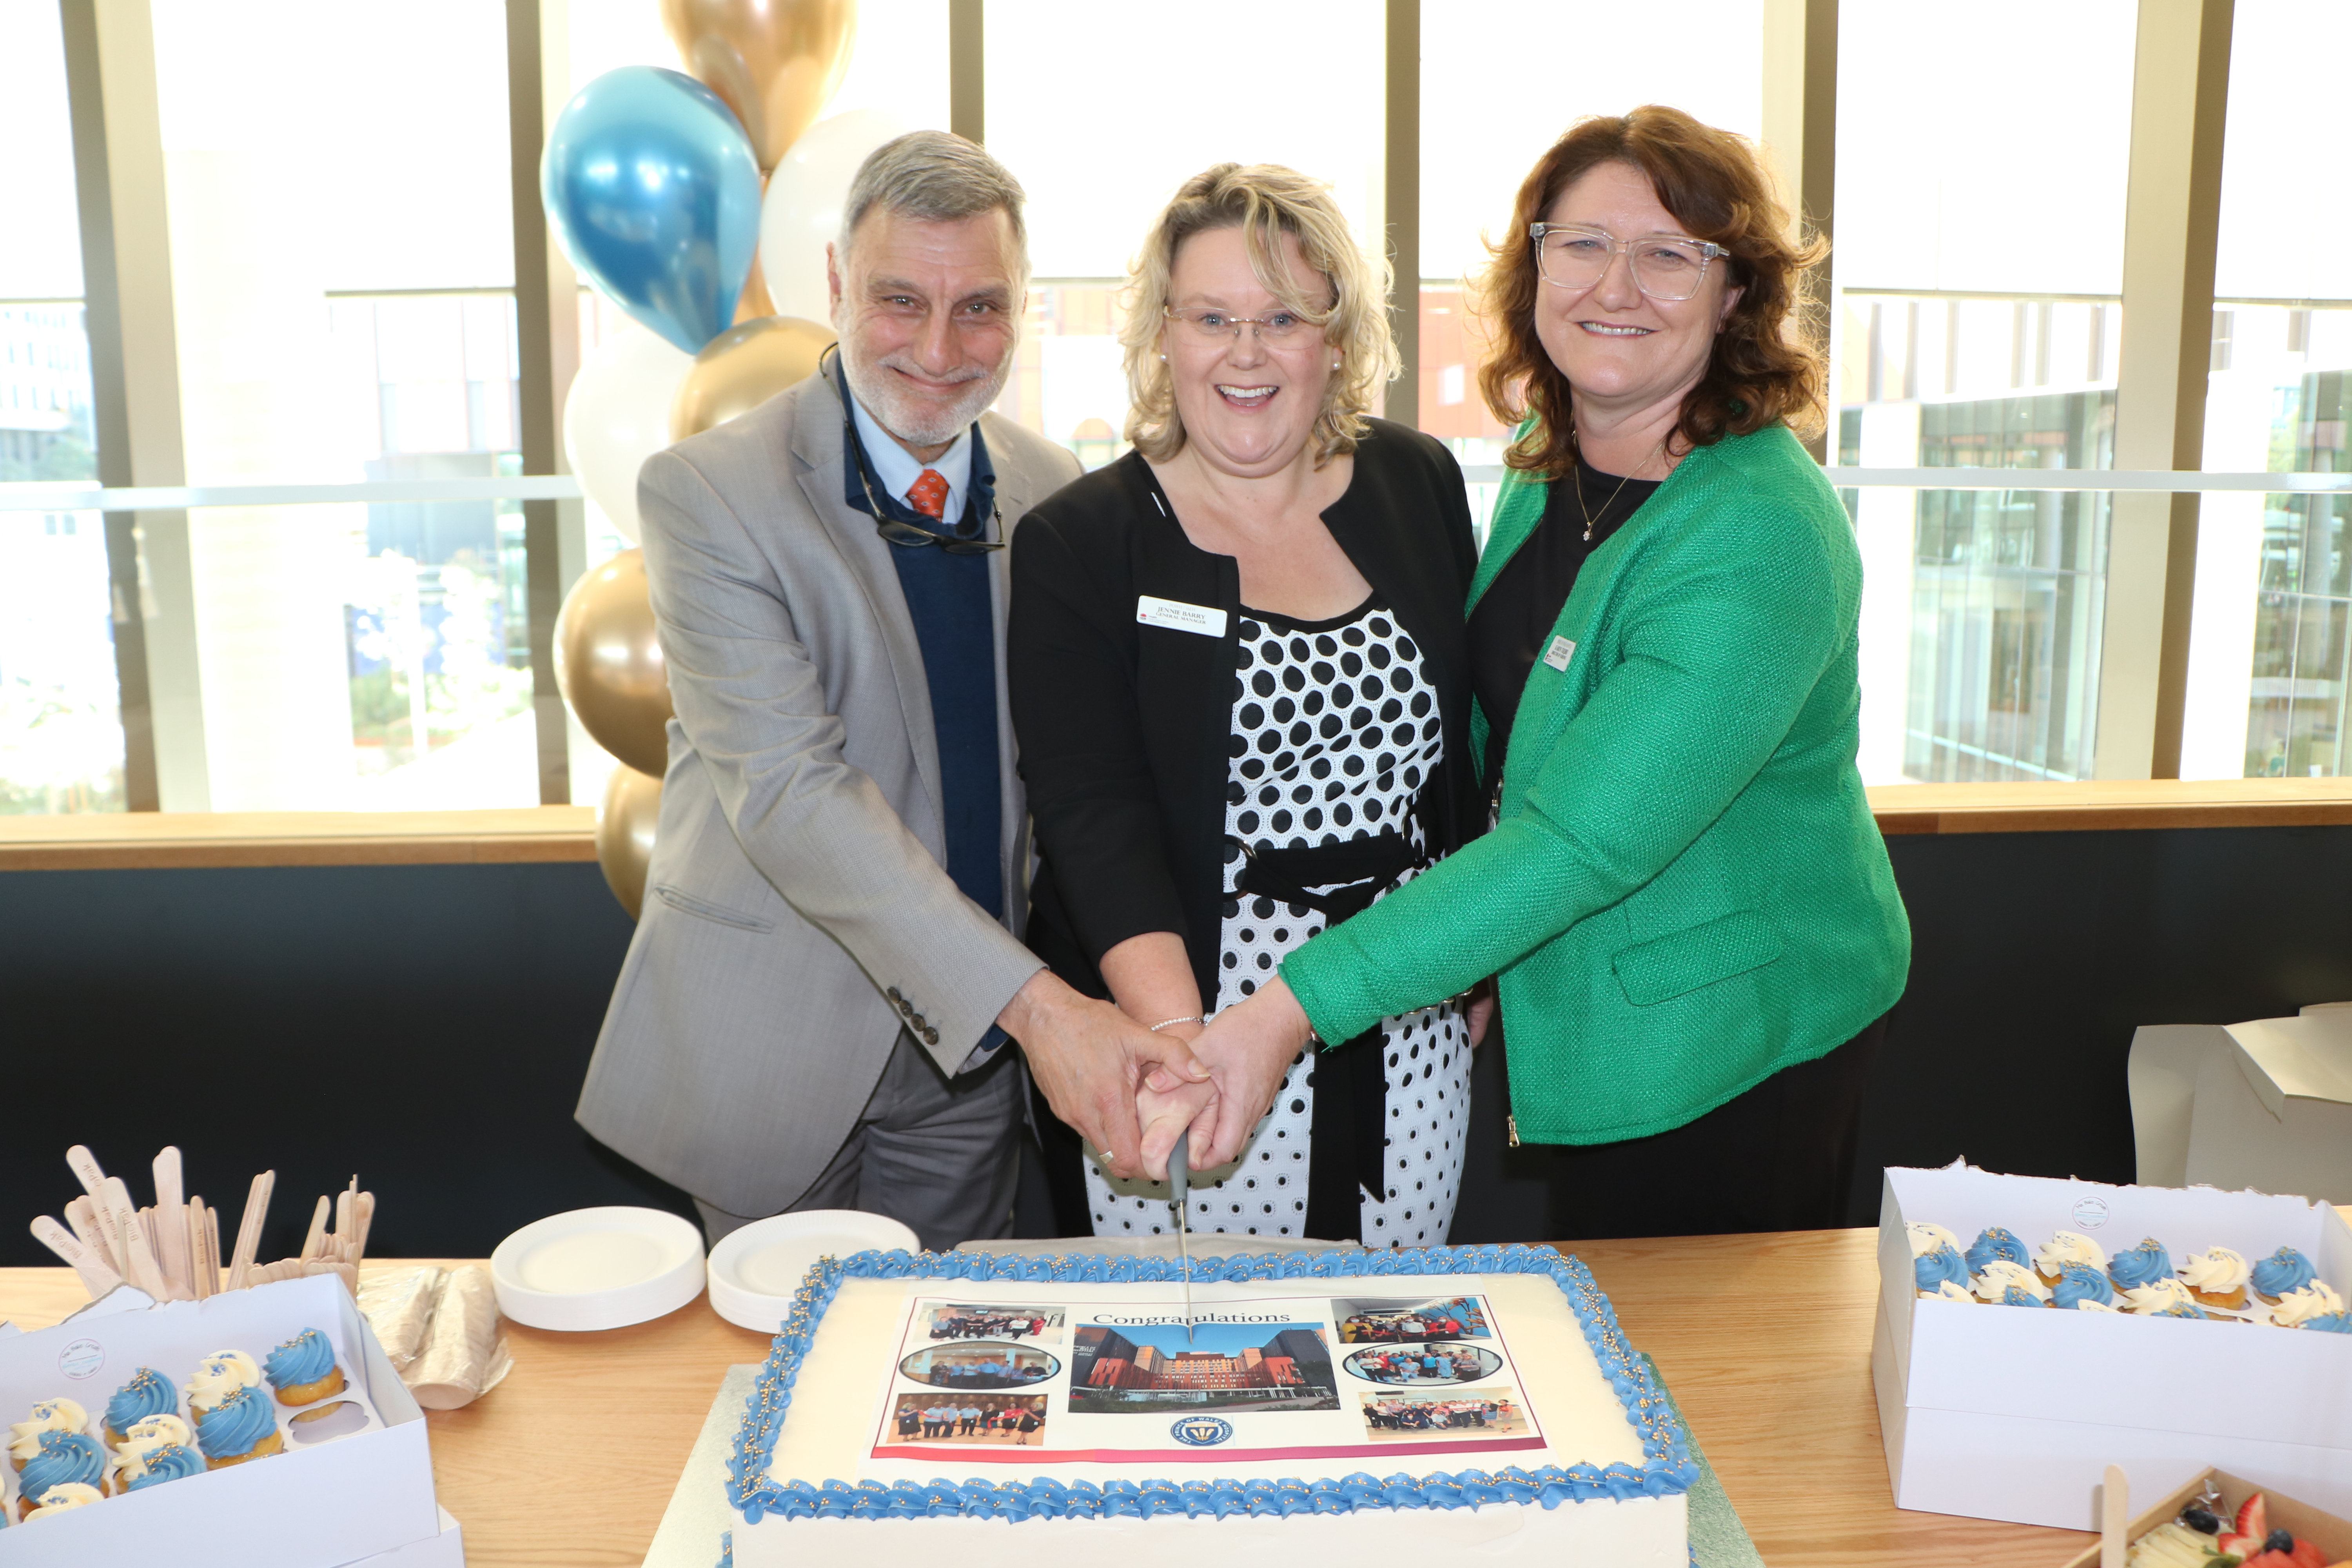 Prince of Wales Hospital Executive team cut the cake in celebration